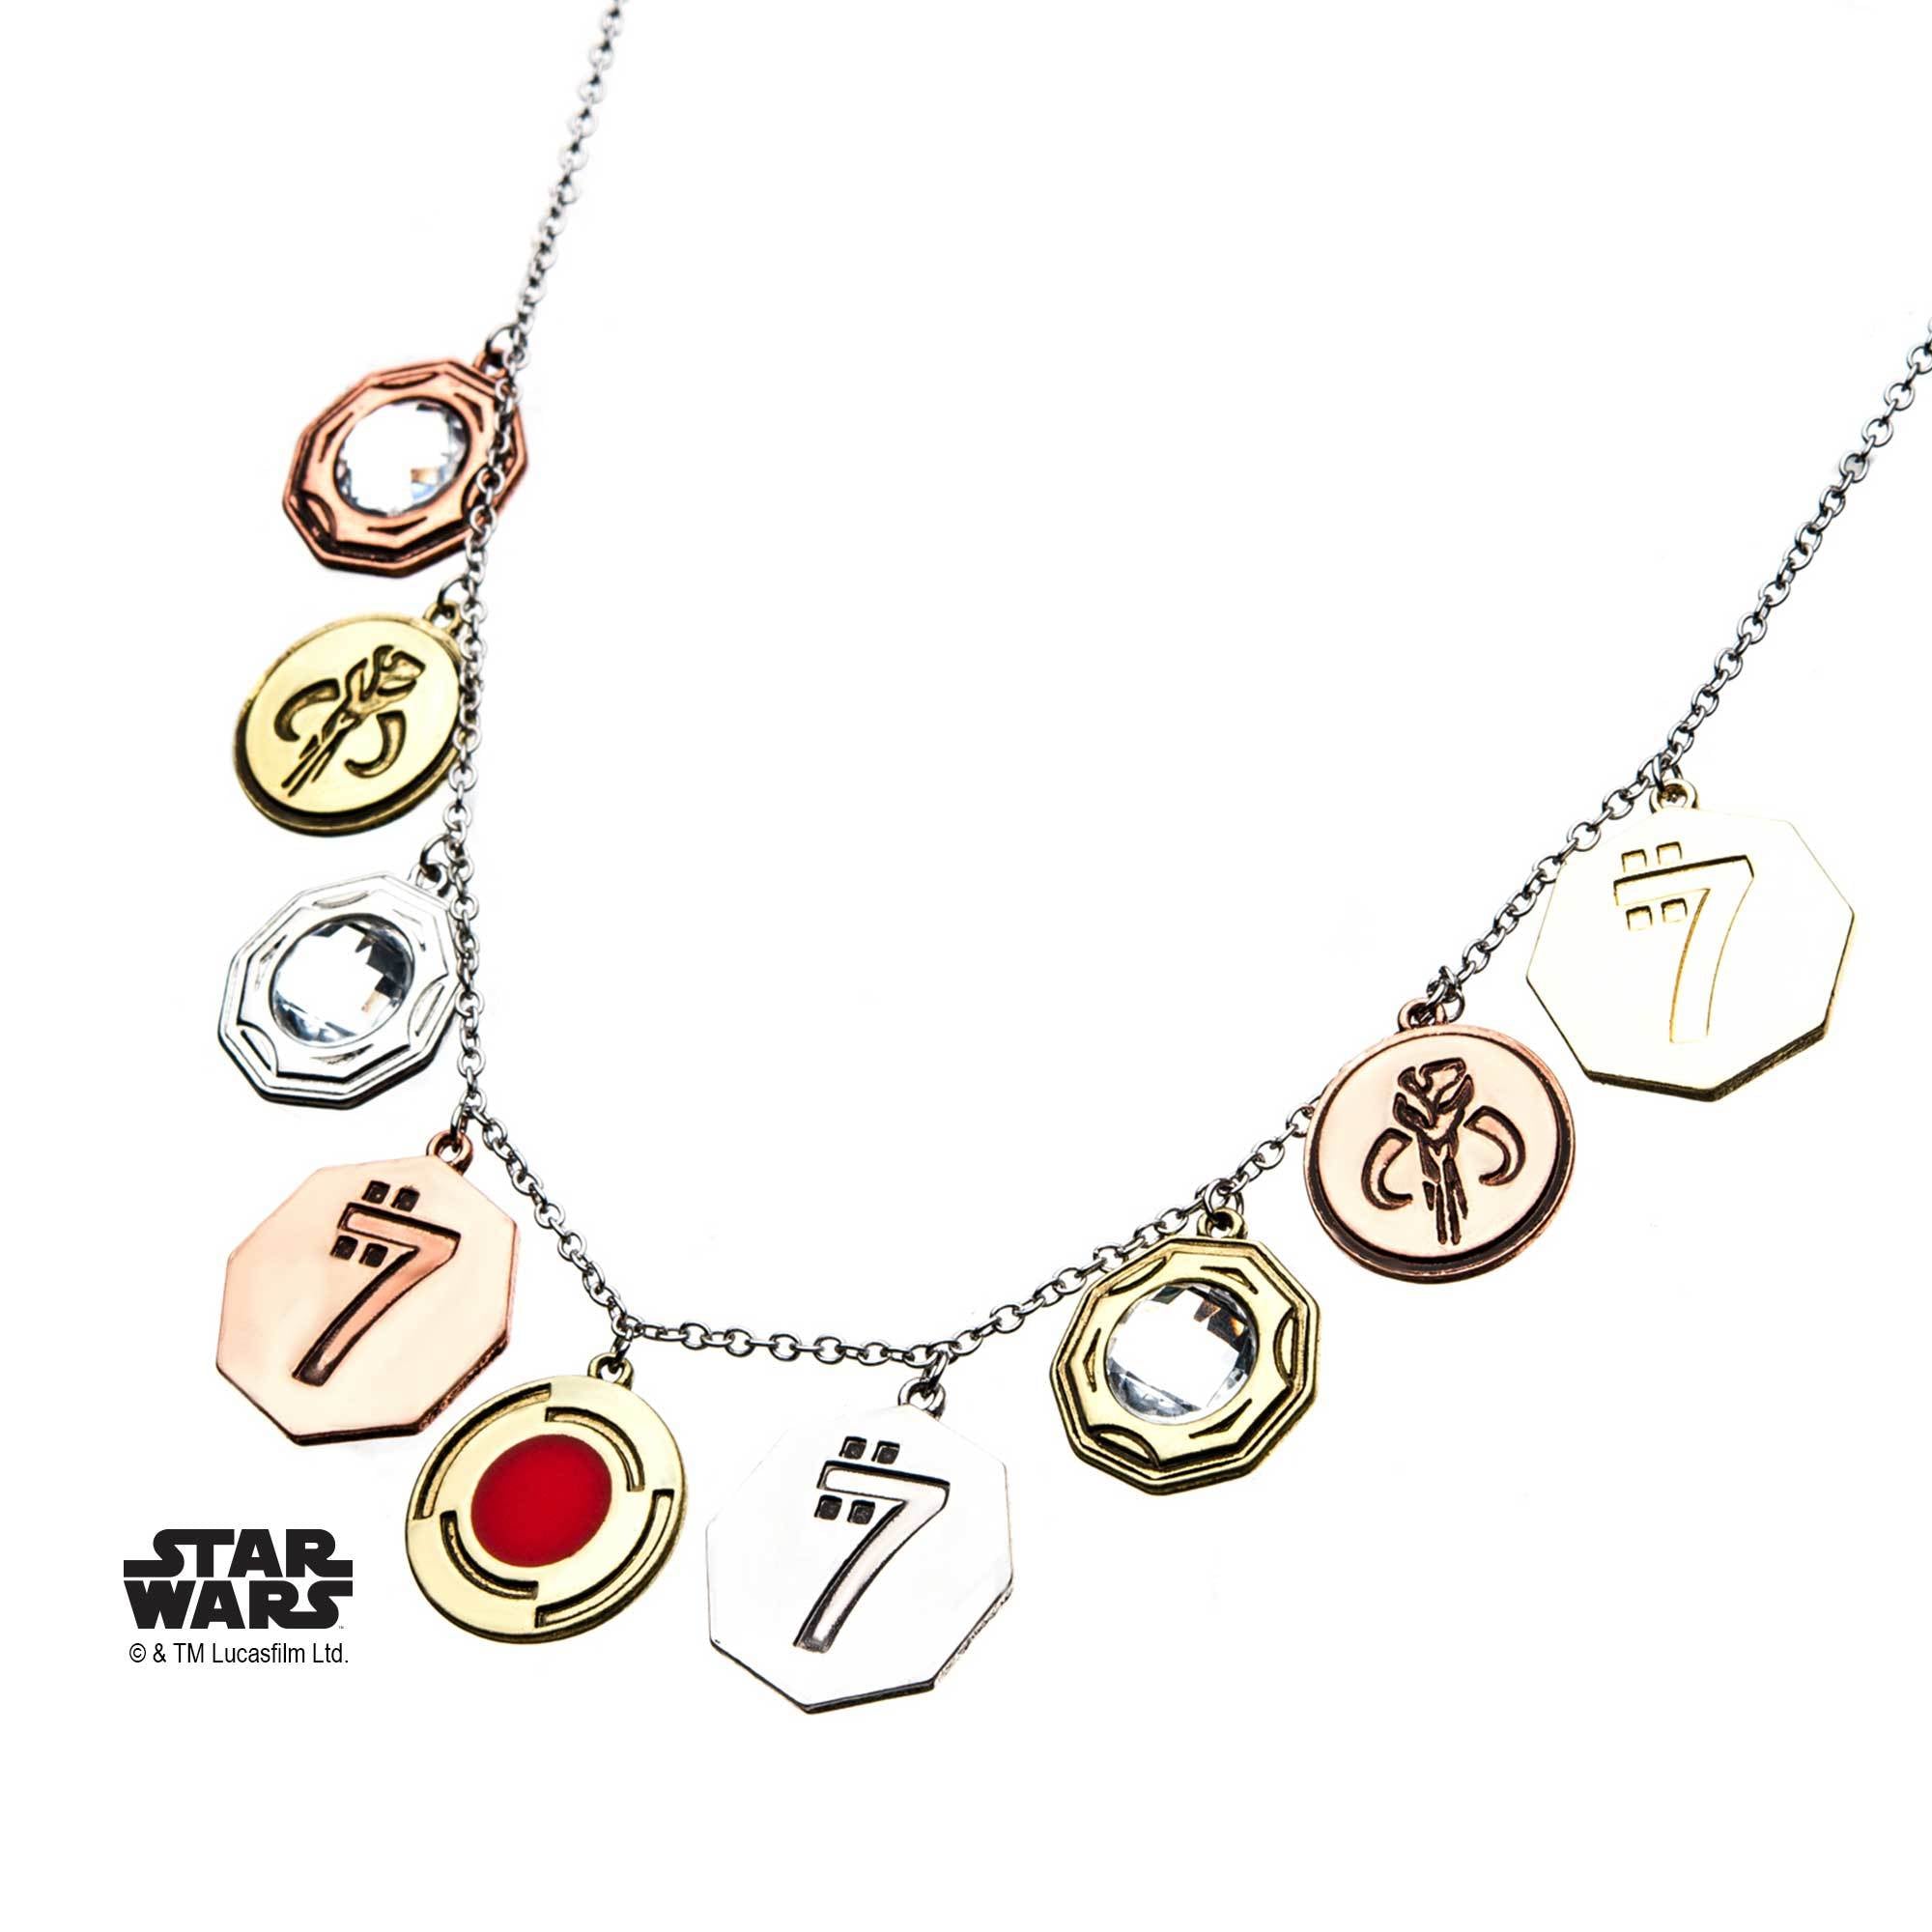 Star Wars Sabacc Coin Bling Necklace